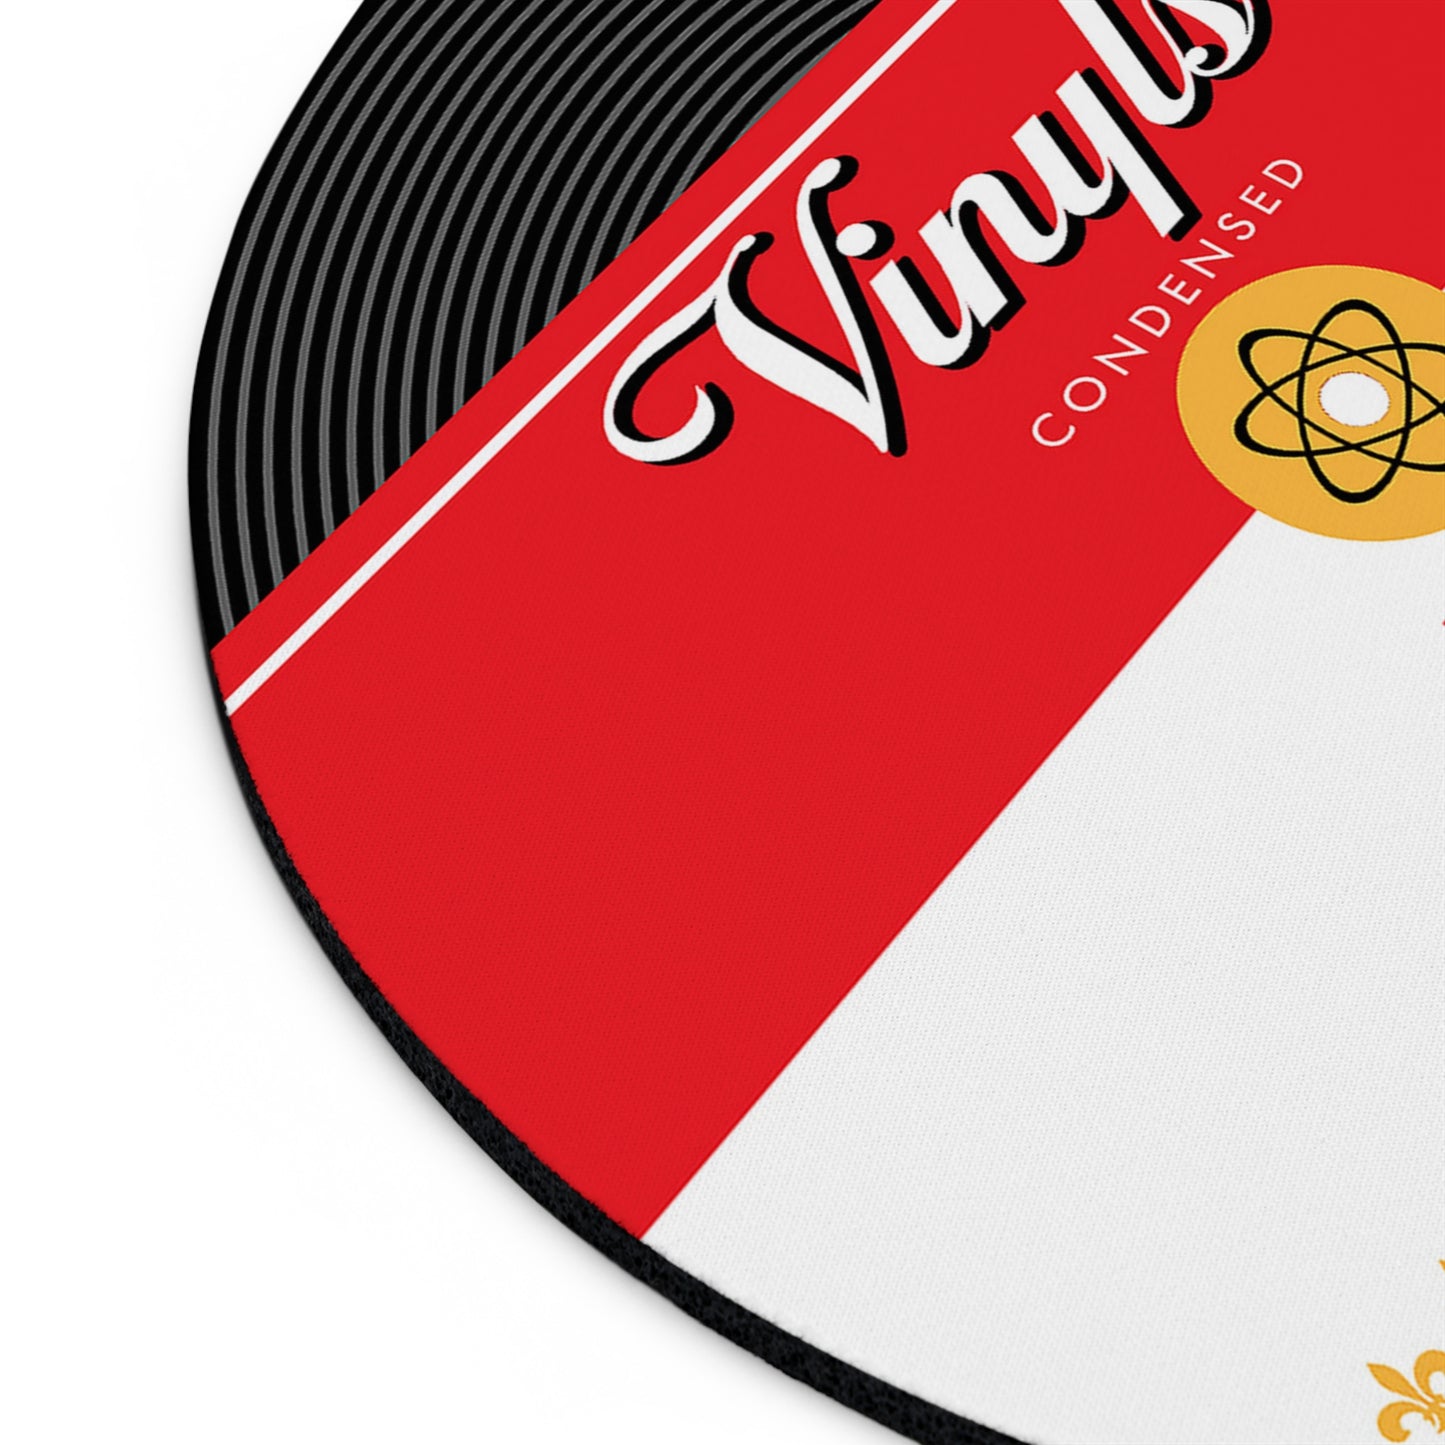 Vinyl Record Themed Mouse Pad Vinyl Condensed Print close up